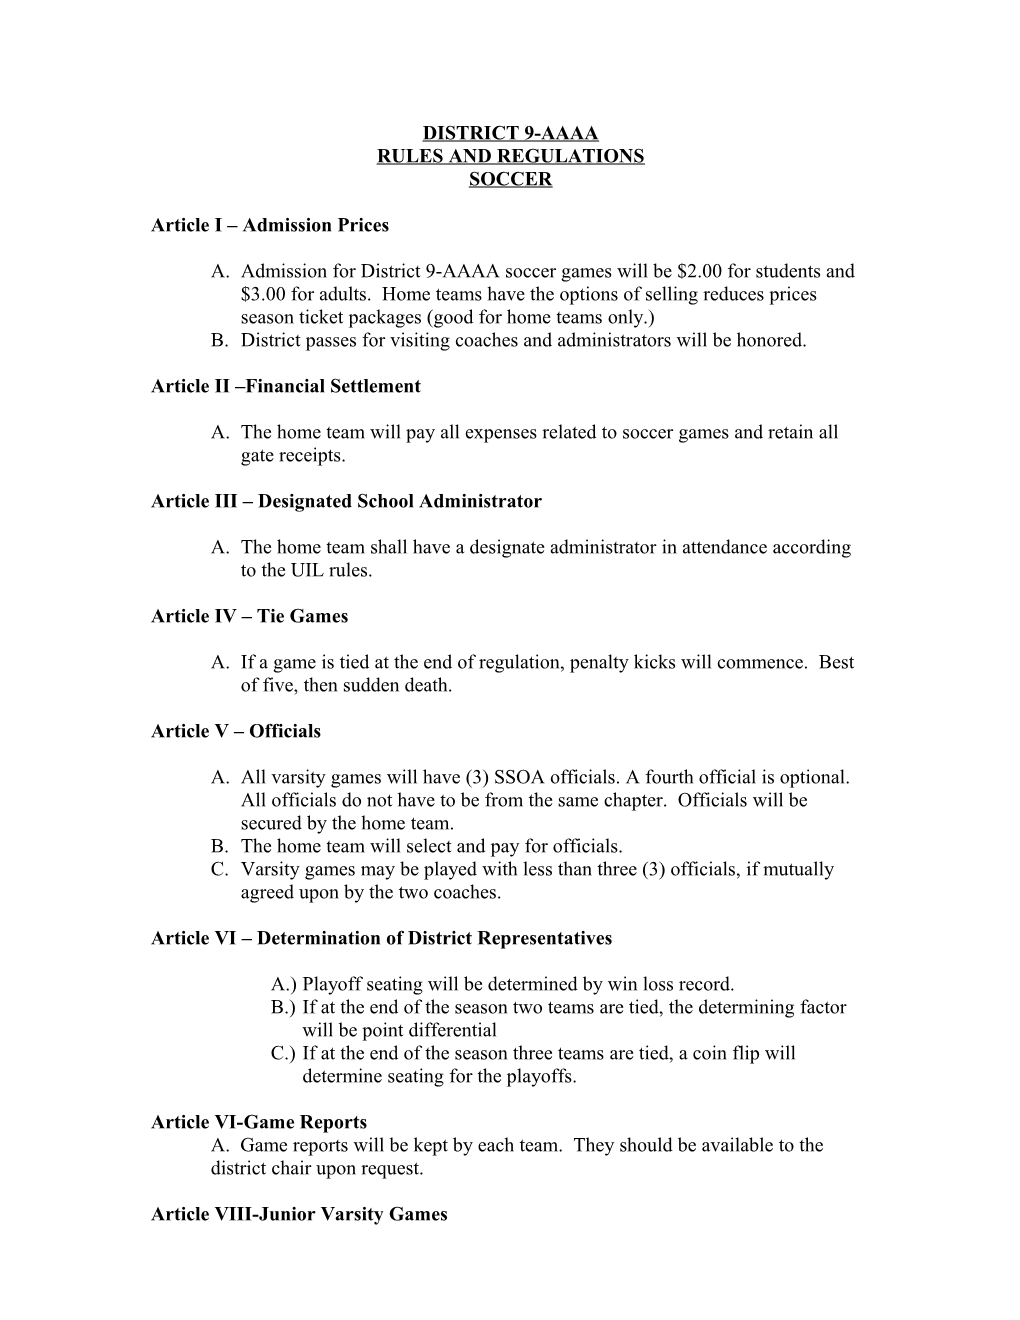 Rules and Regulations s6